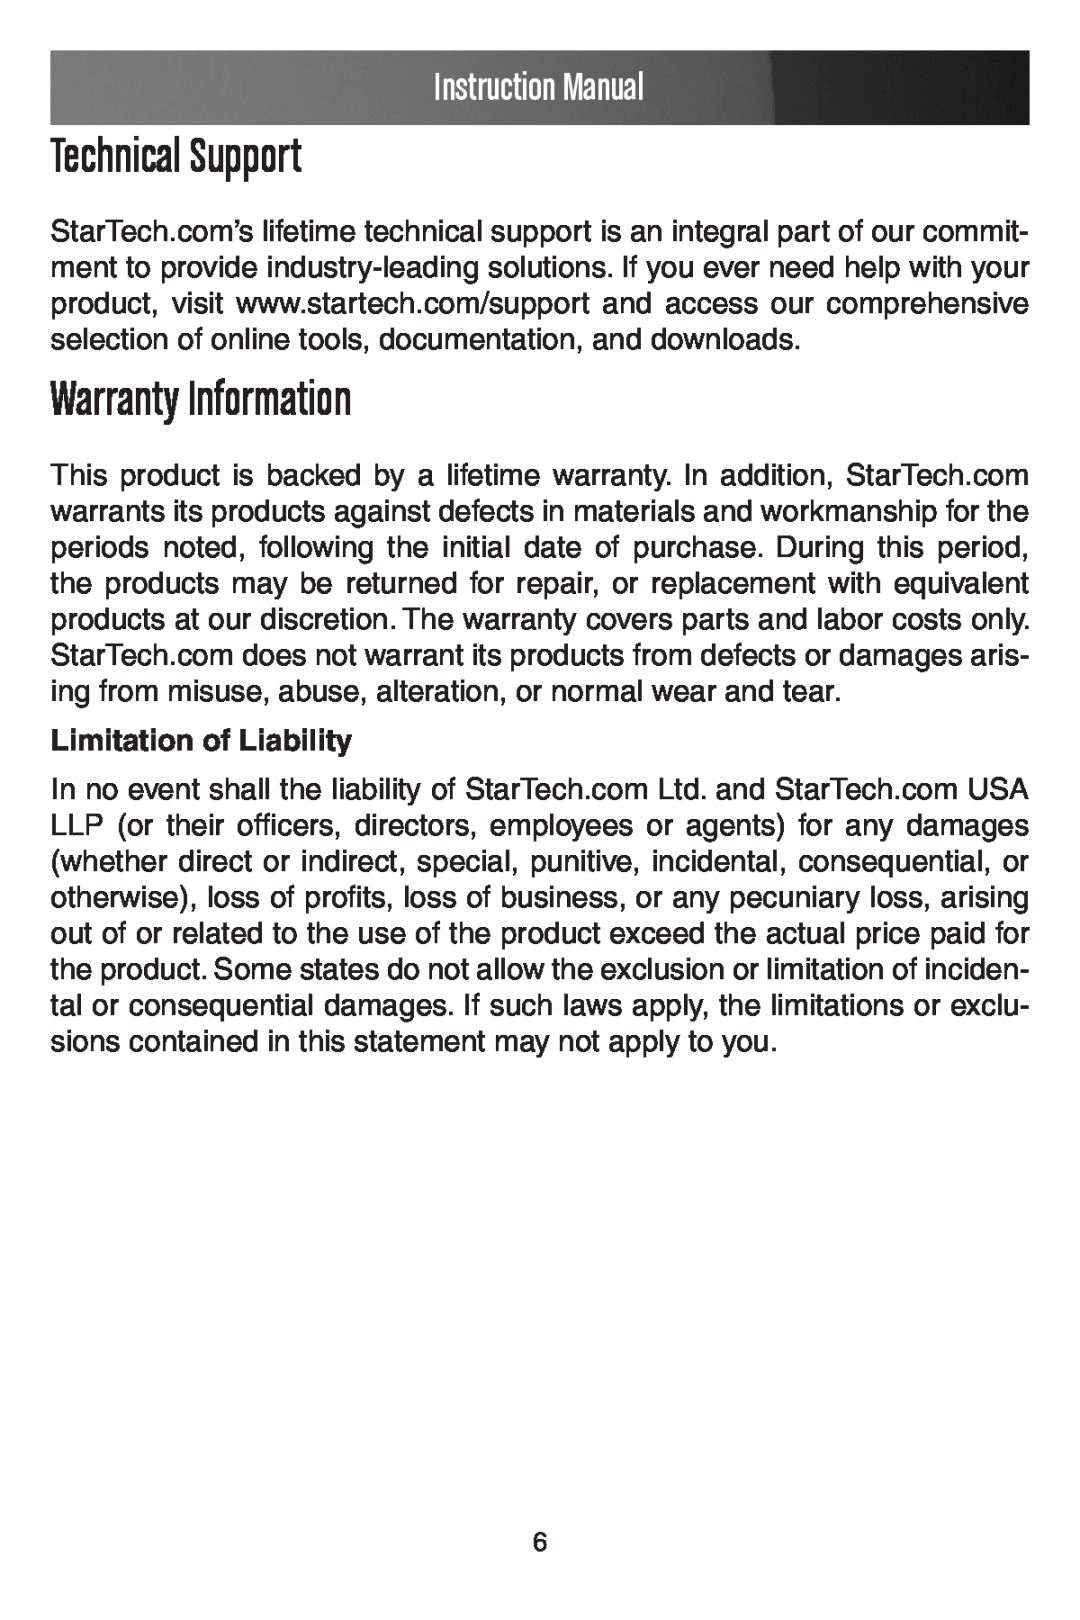 StarTech.com PCISOUND4LP manual Technical Support, Warranty Information, Limitation of Liability, Instruction Manual 